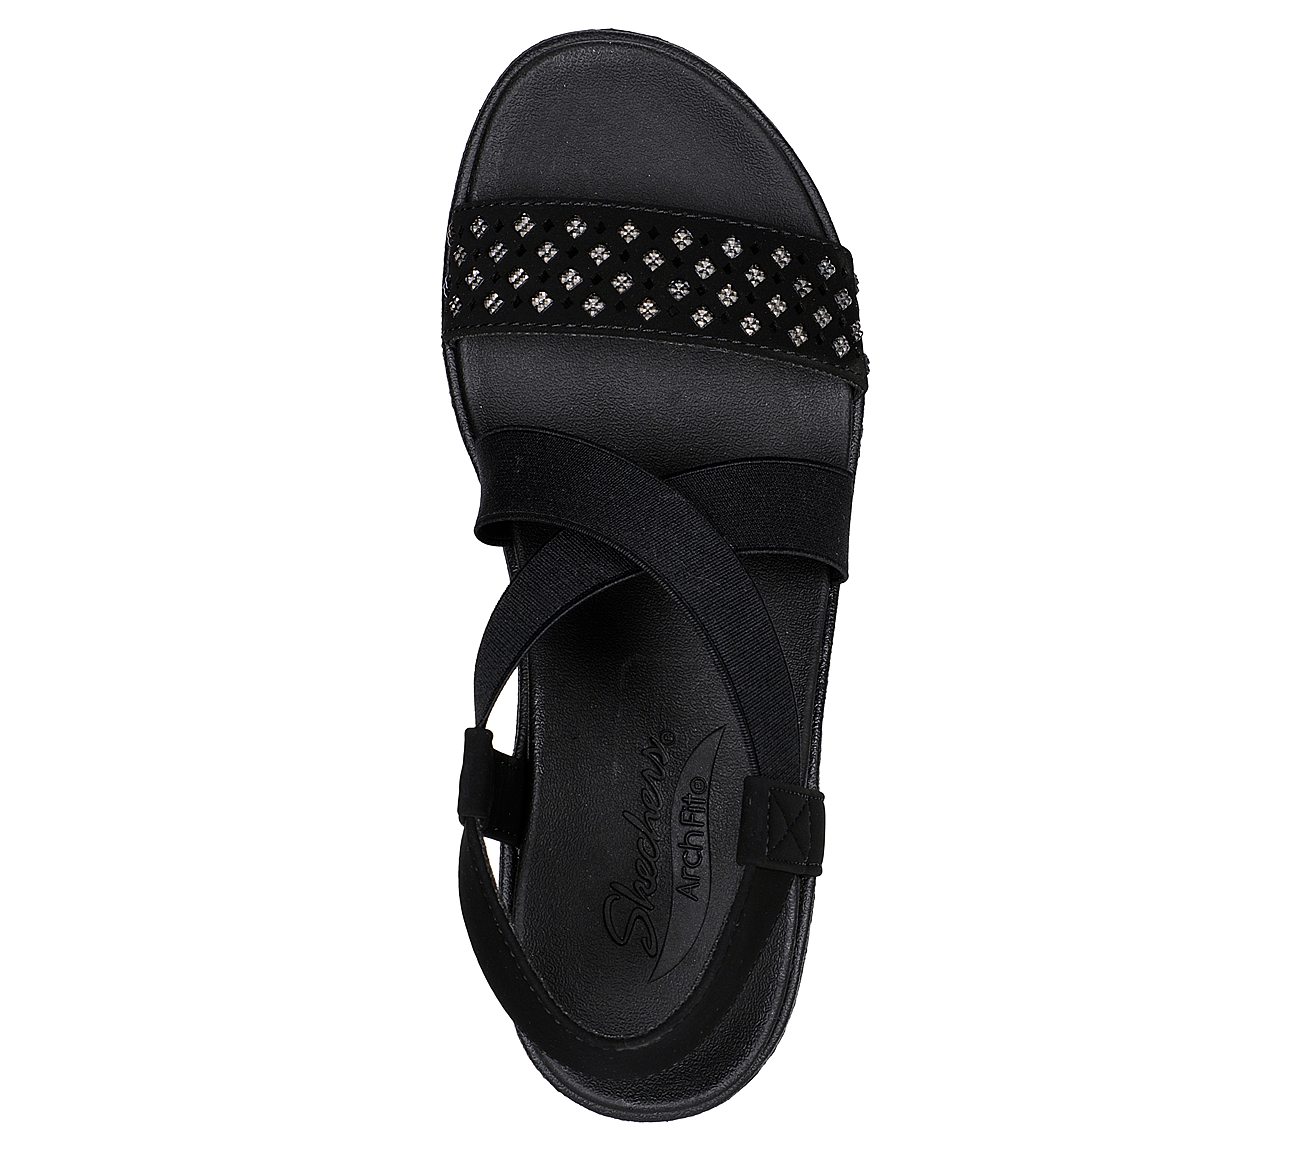 ARCH FIT RUMBLE, BBBBLACK Footwear Top View